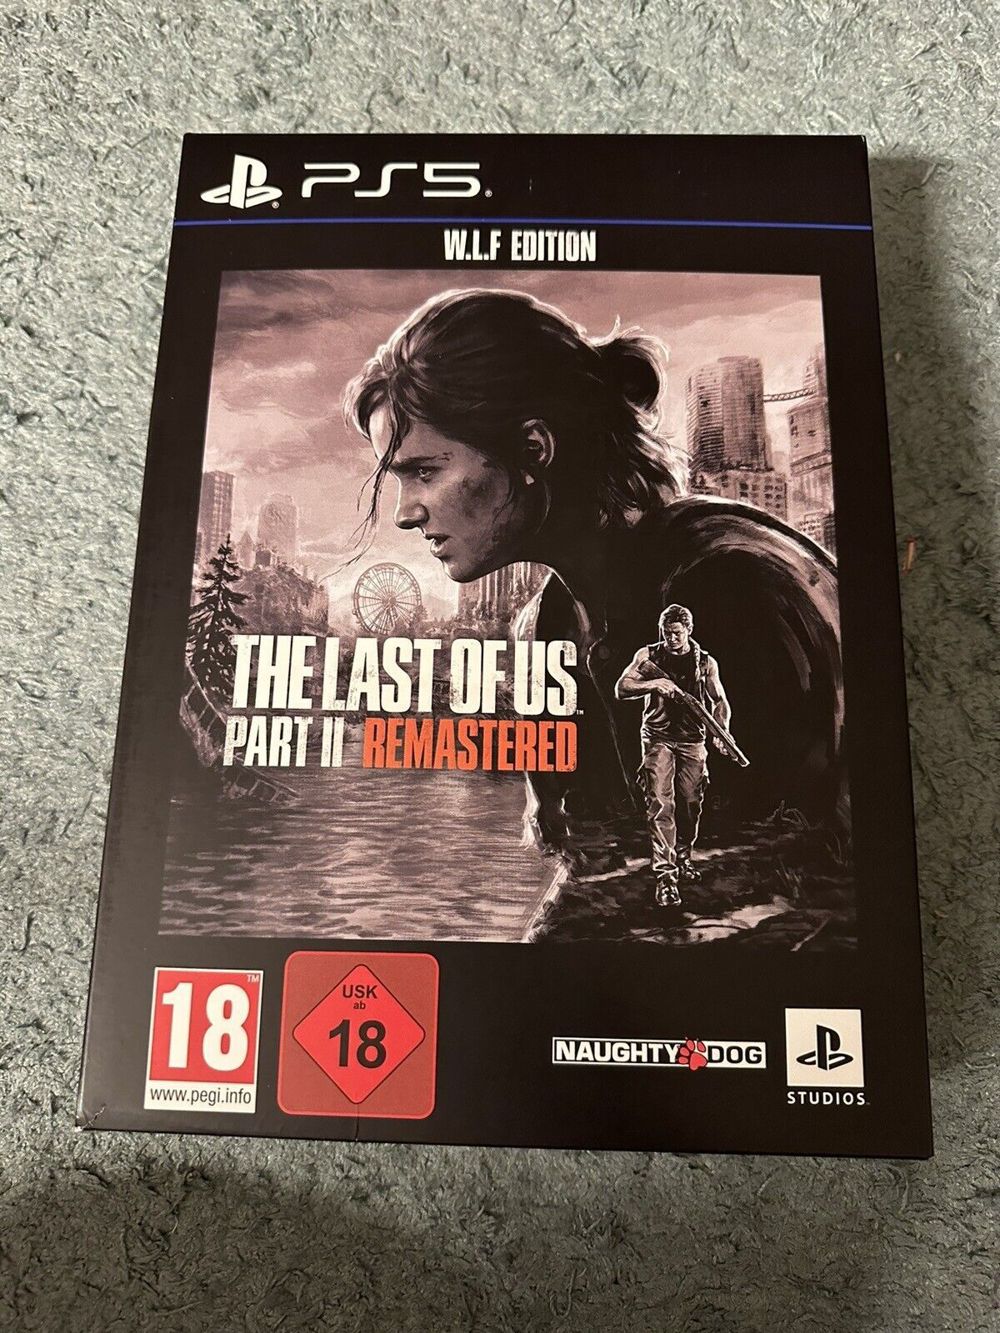 The Last of Us Part II Remastered WLF Edition - PS5 - NEU OVP SEALED